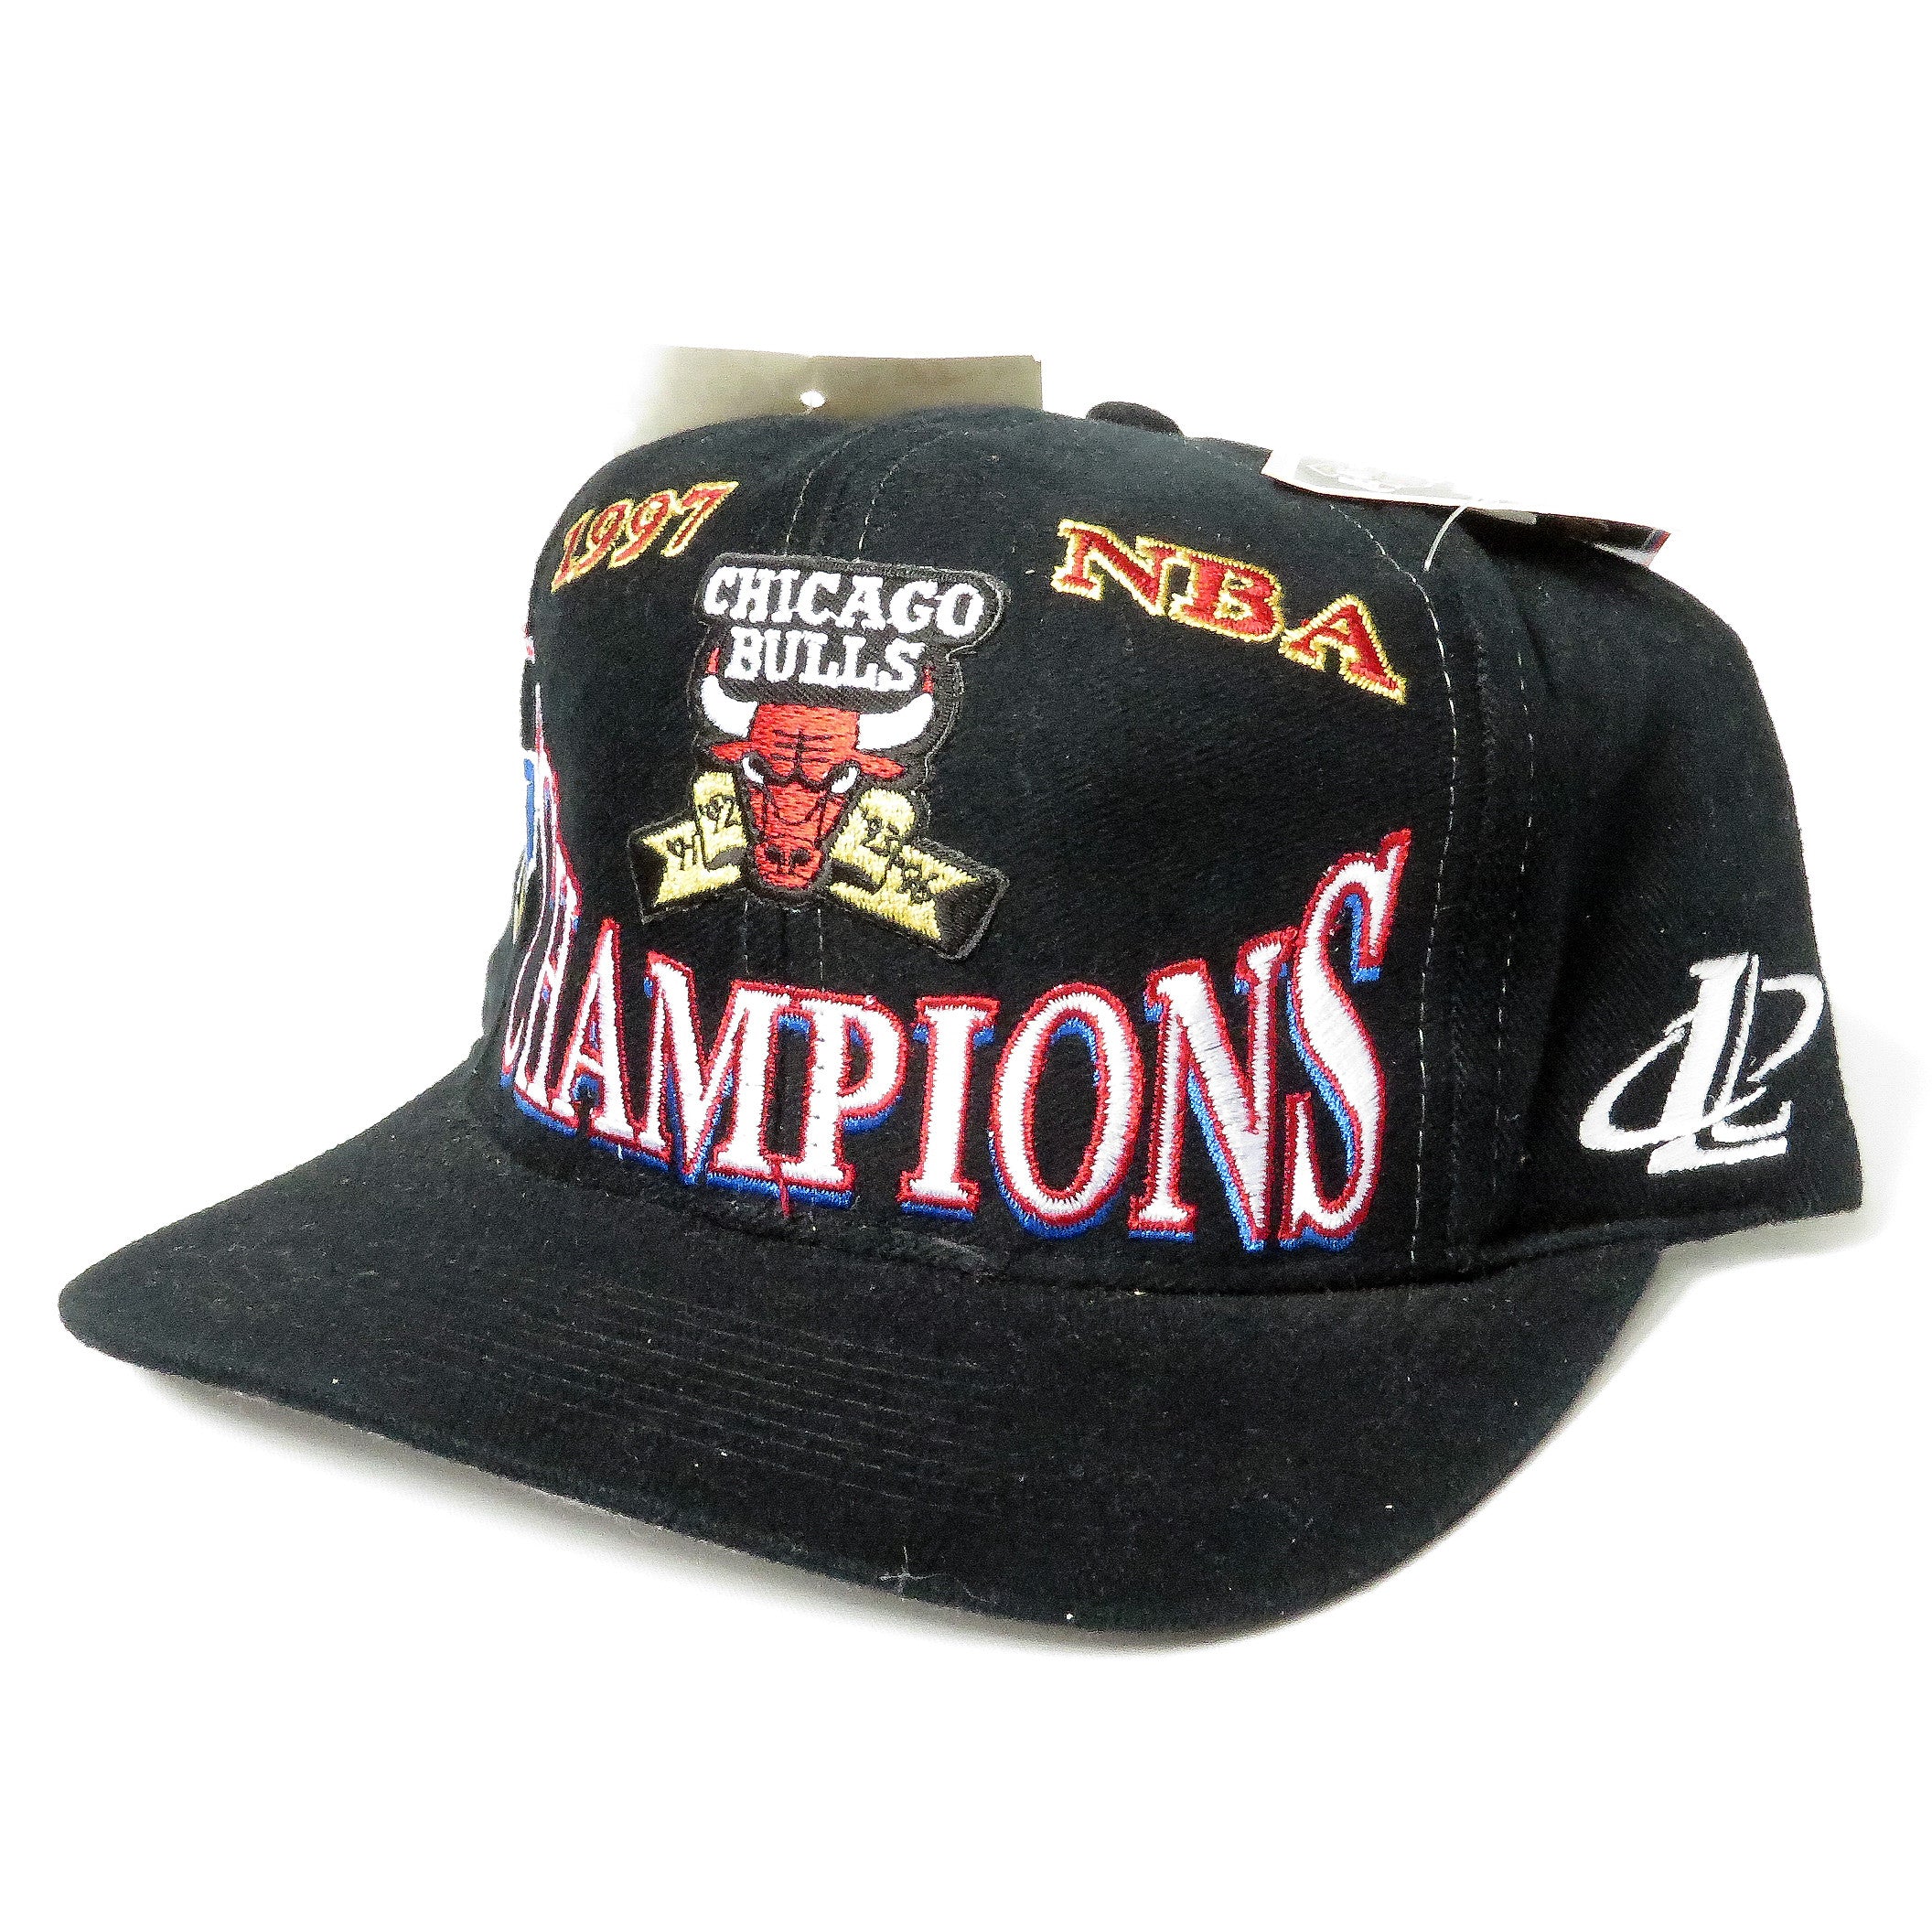 I FOUND AUTHENTIC CHICAGO BULLS CHAMPIONSHIP CAPS TO GIVEAWAY TO YOU!!!! 